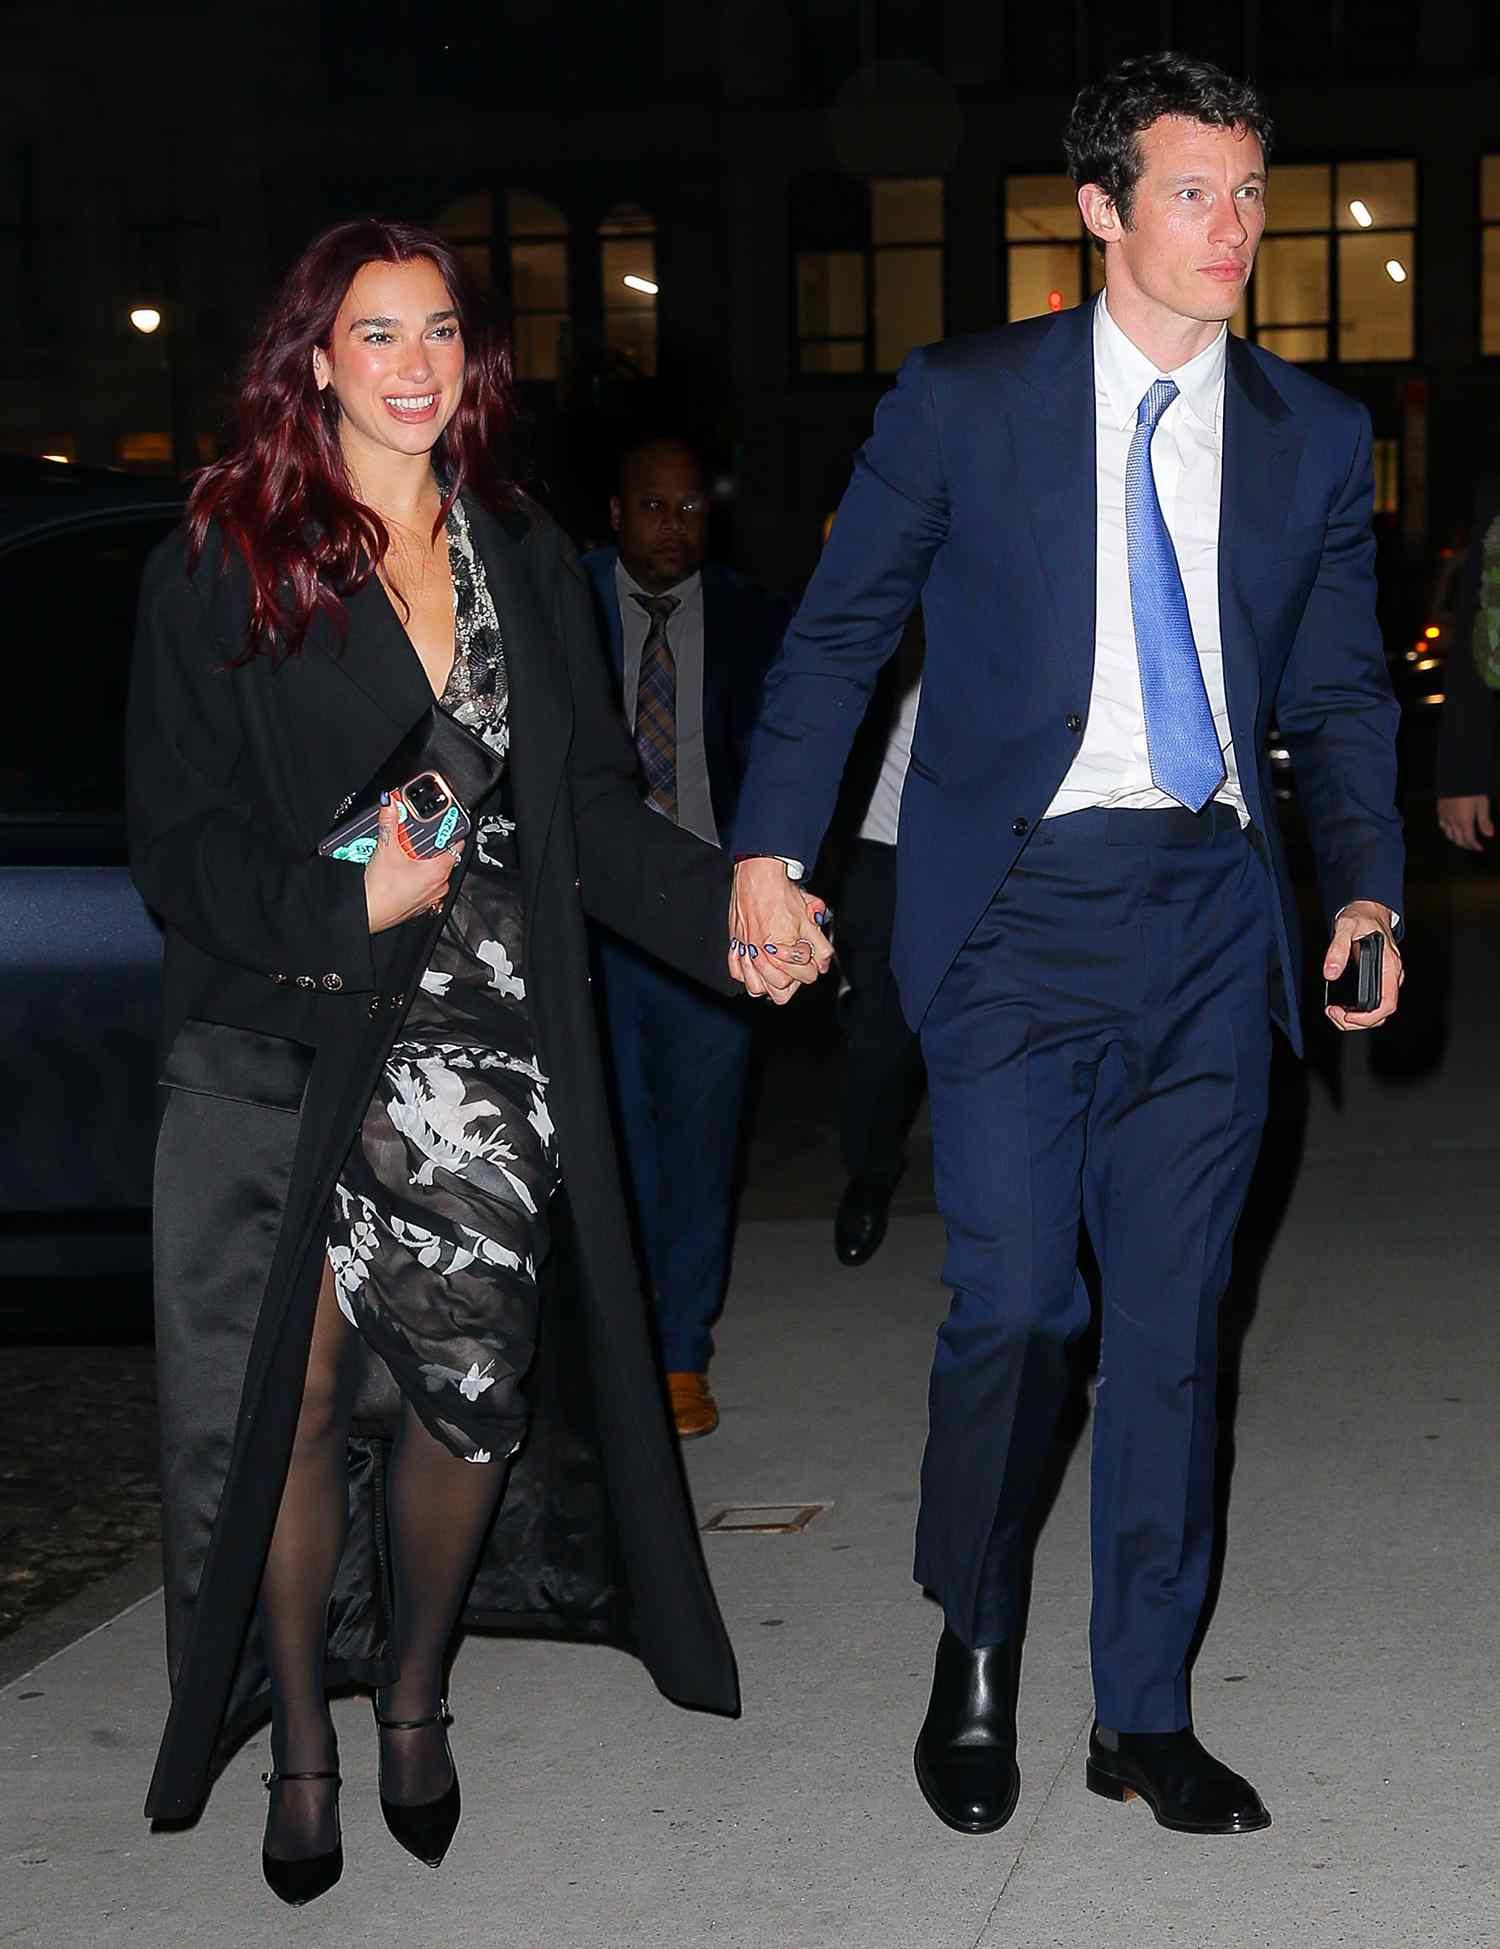 Dua Lipa is all smiles while holding hands with boyfriend Callum Turner as they arrive at Zero Bond for a romantic dinner after her Performance at the Time 100 in New York City